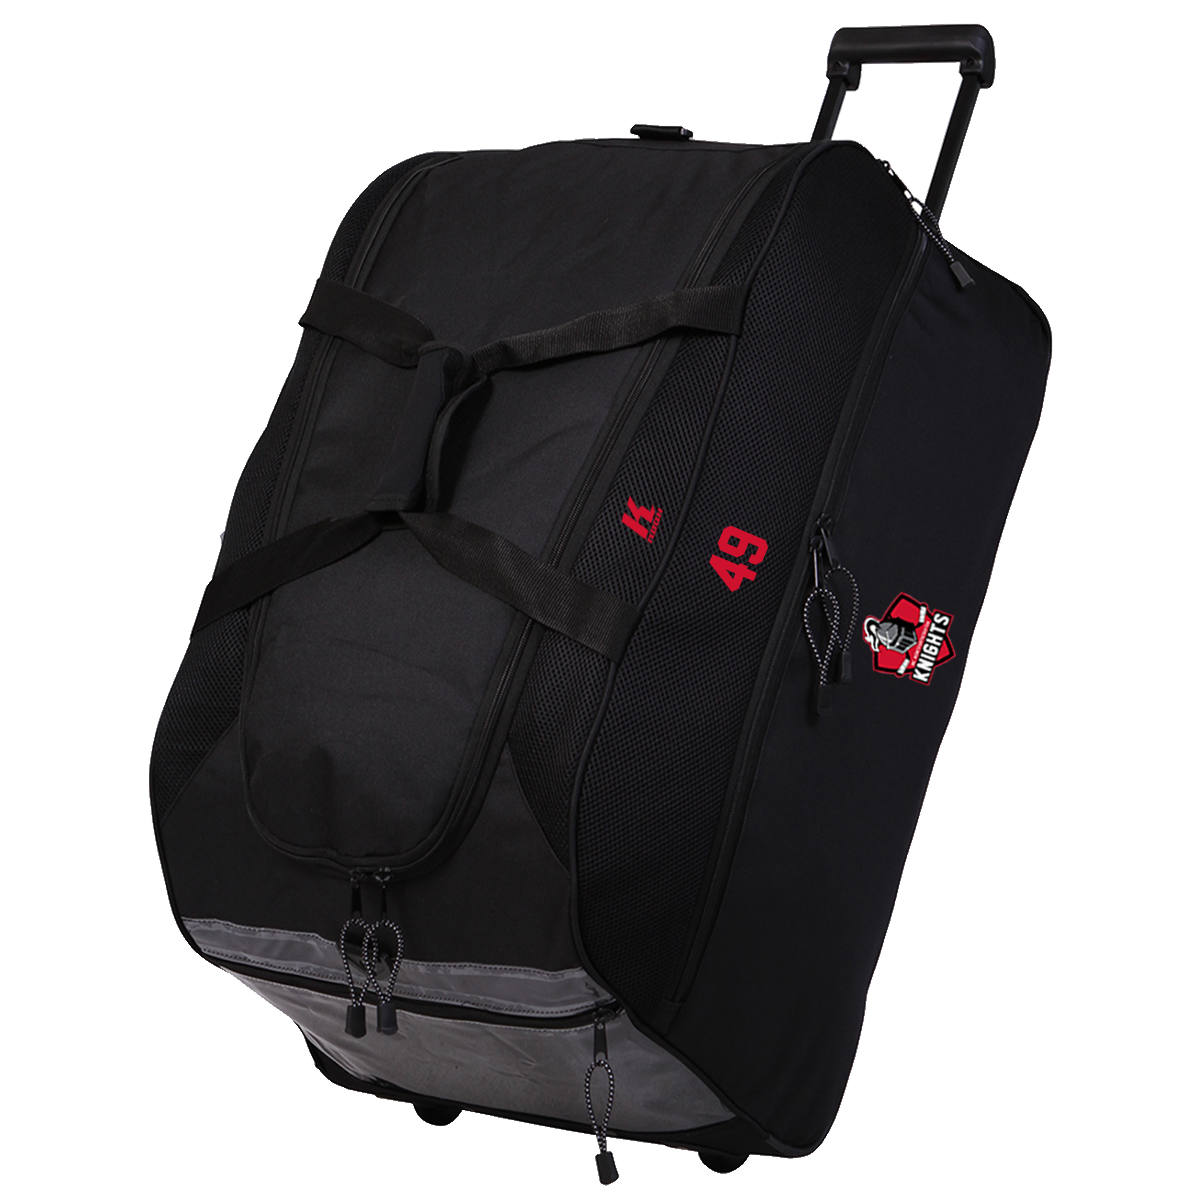 HCK Wheelie Team Kitbag with Playernumber or Initials